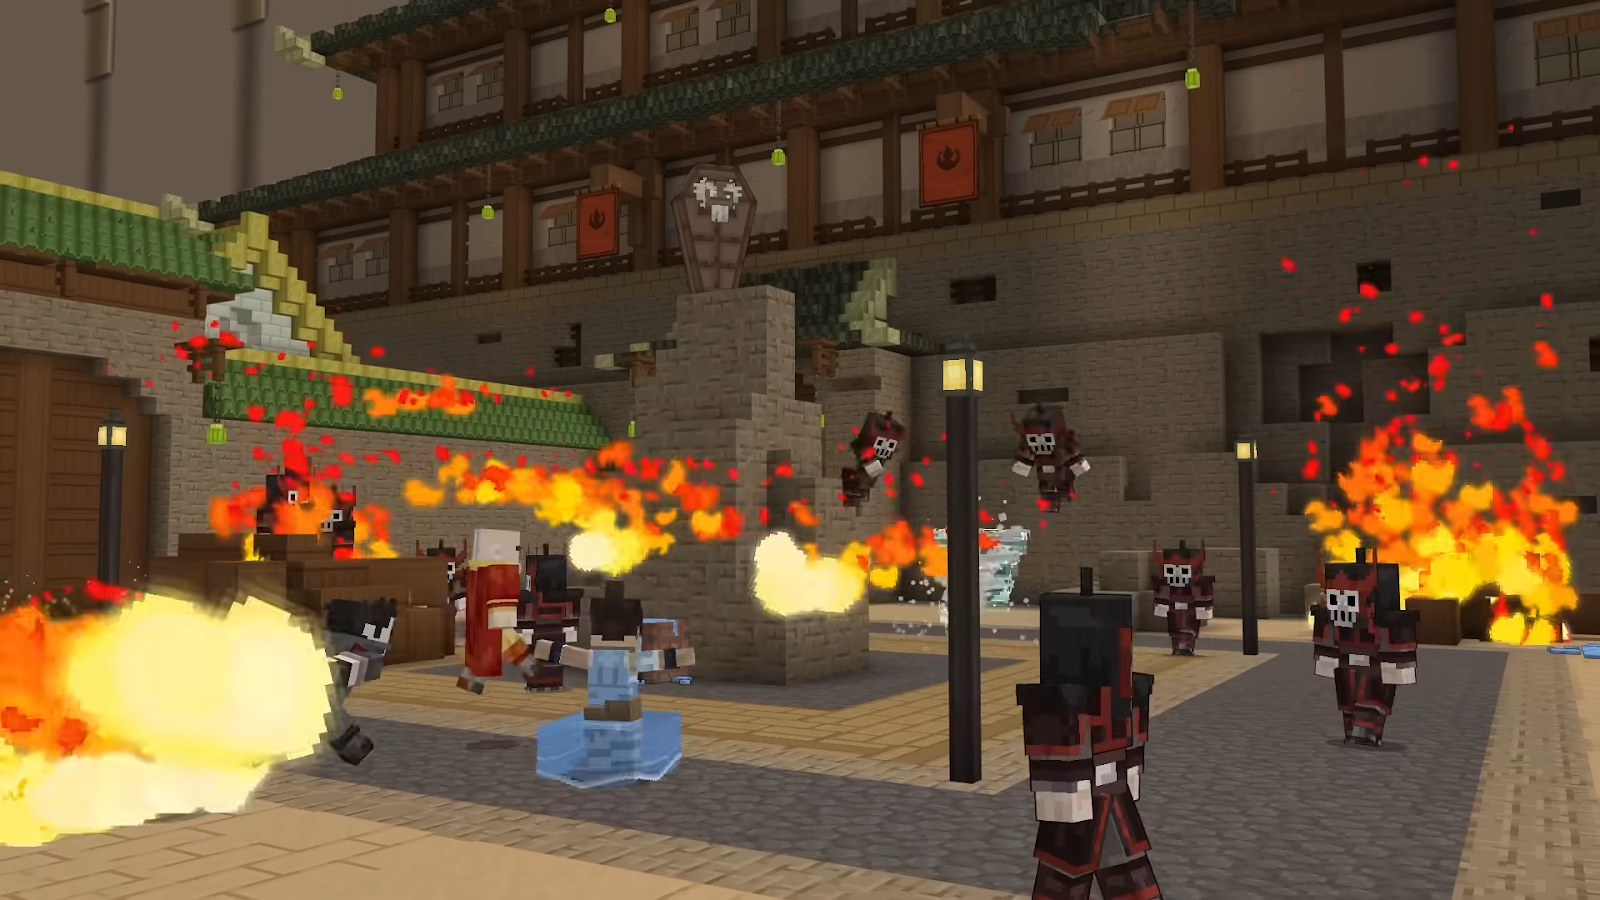 Minecraft map lets you play as the Avatar Aang, Korra, and friends